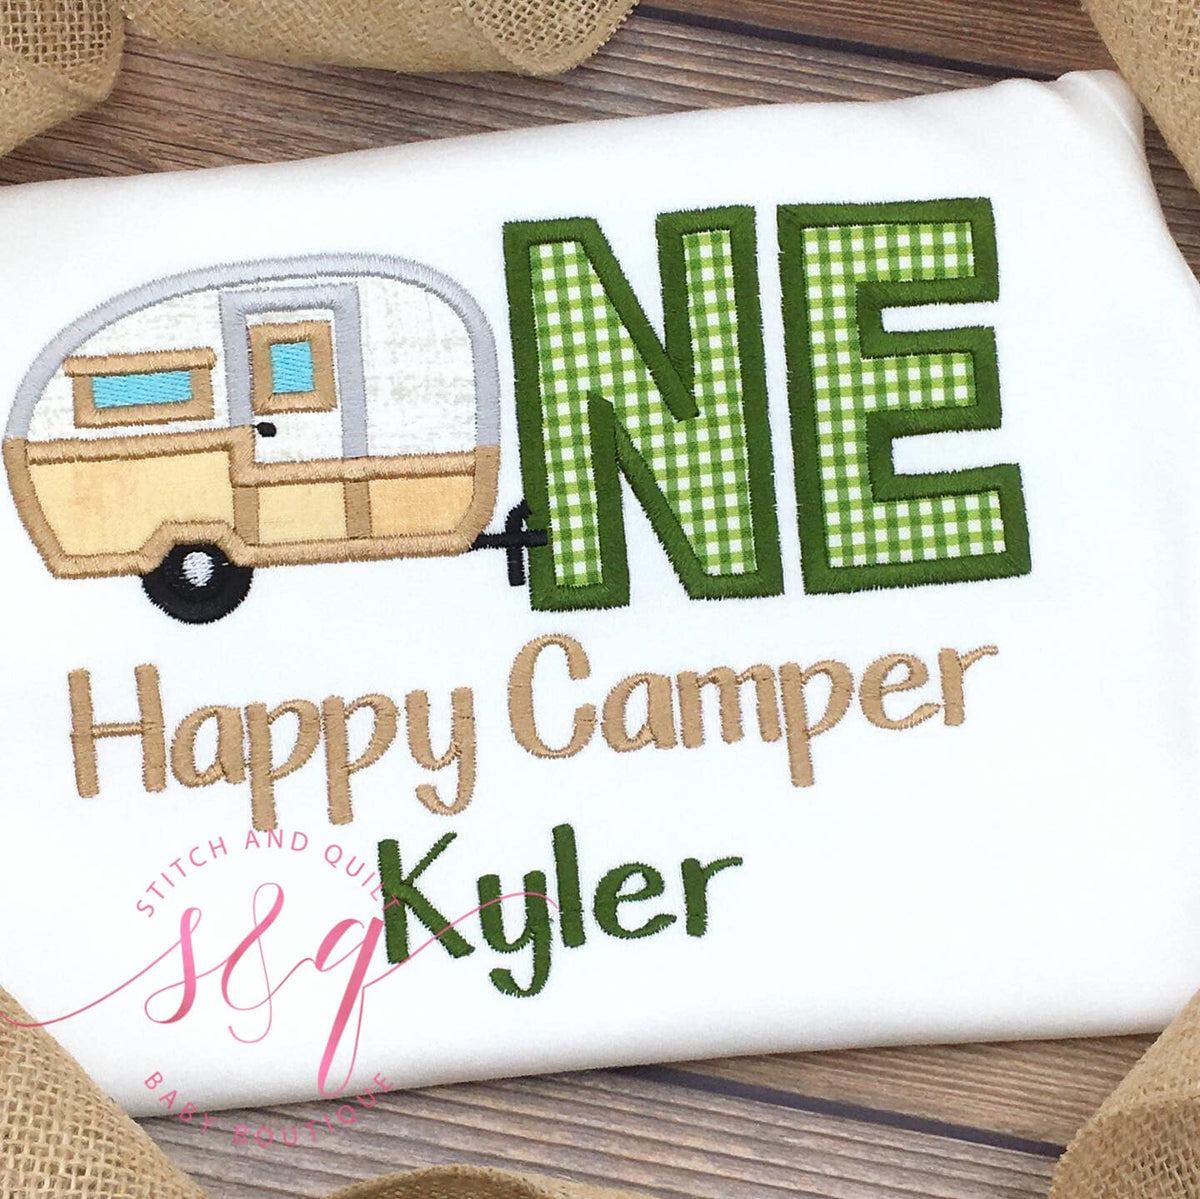 Camper One happy camper, camping birthday, camping theme, camping party, camping shirt, first birthday shirt, 1st birthday,